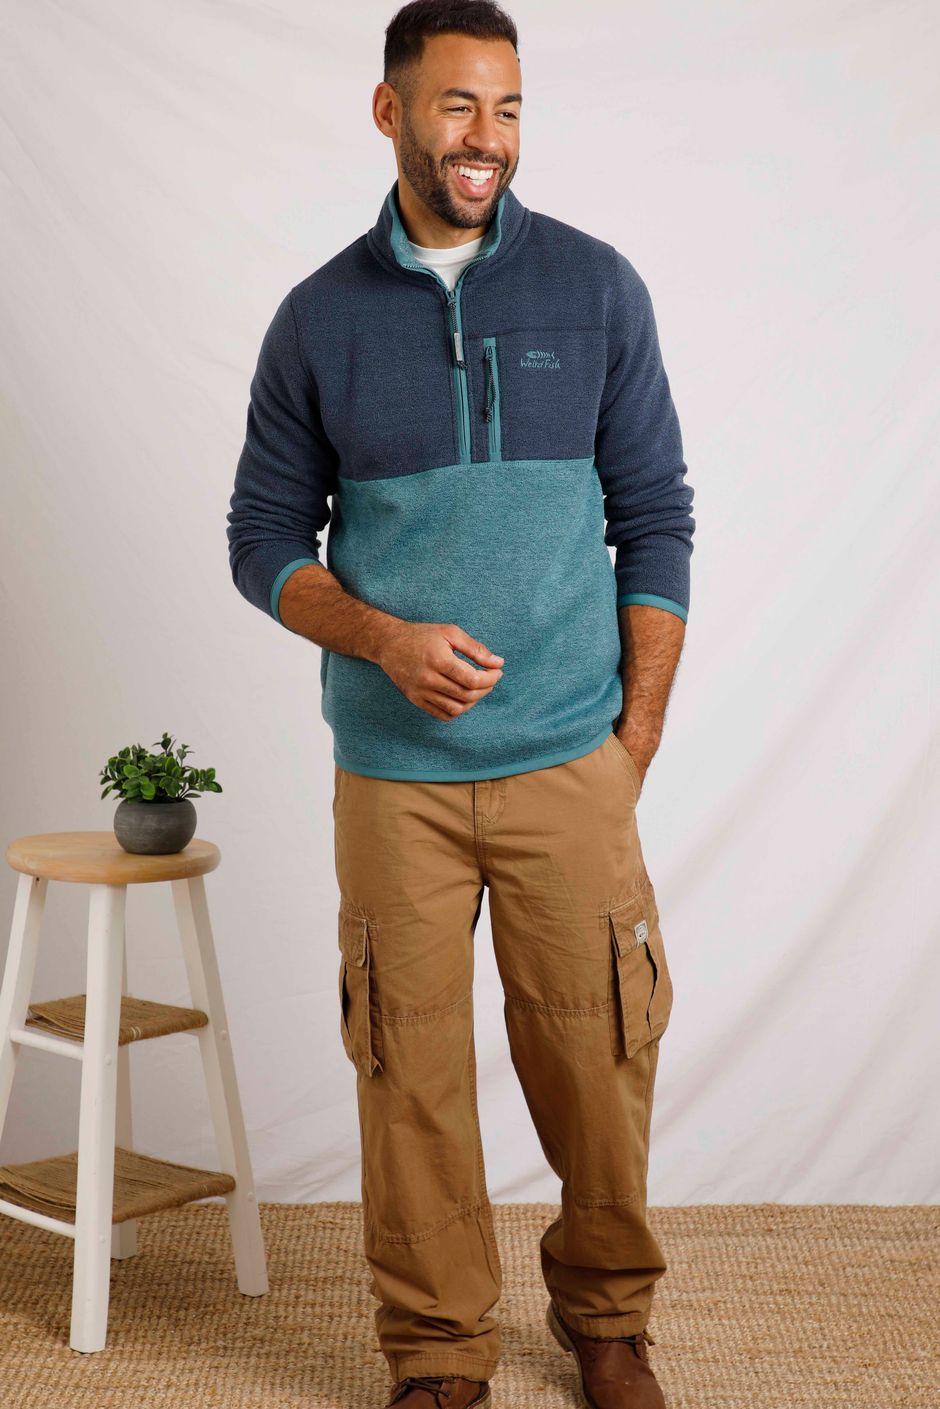 Thunderton Recycled 1/4 Zip Soft Knit Teal Blue